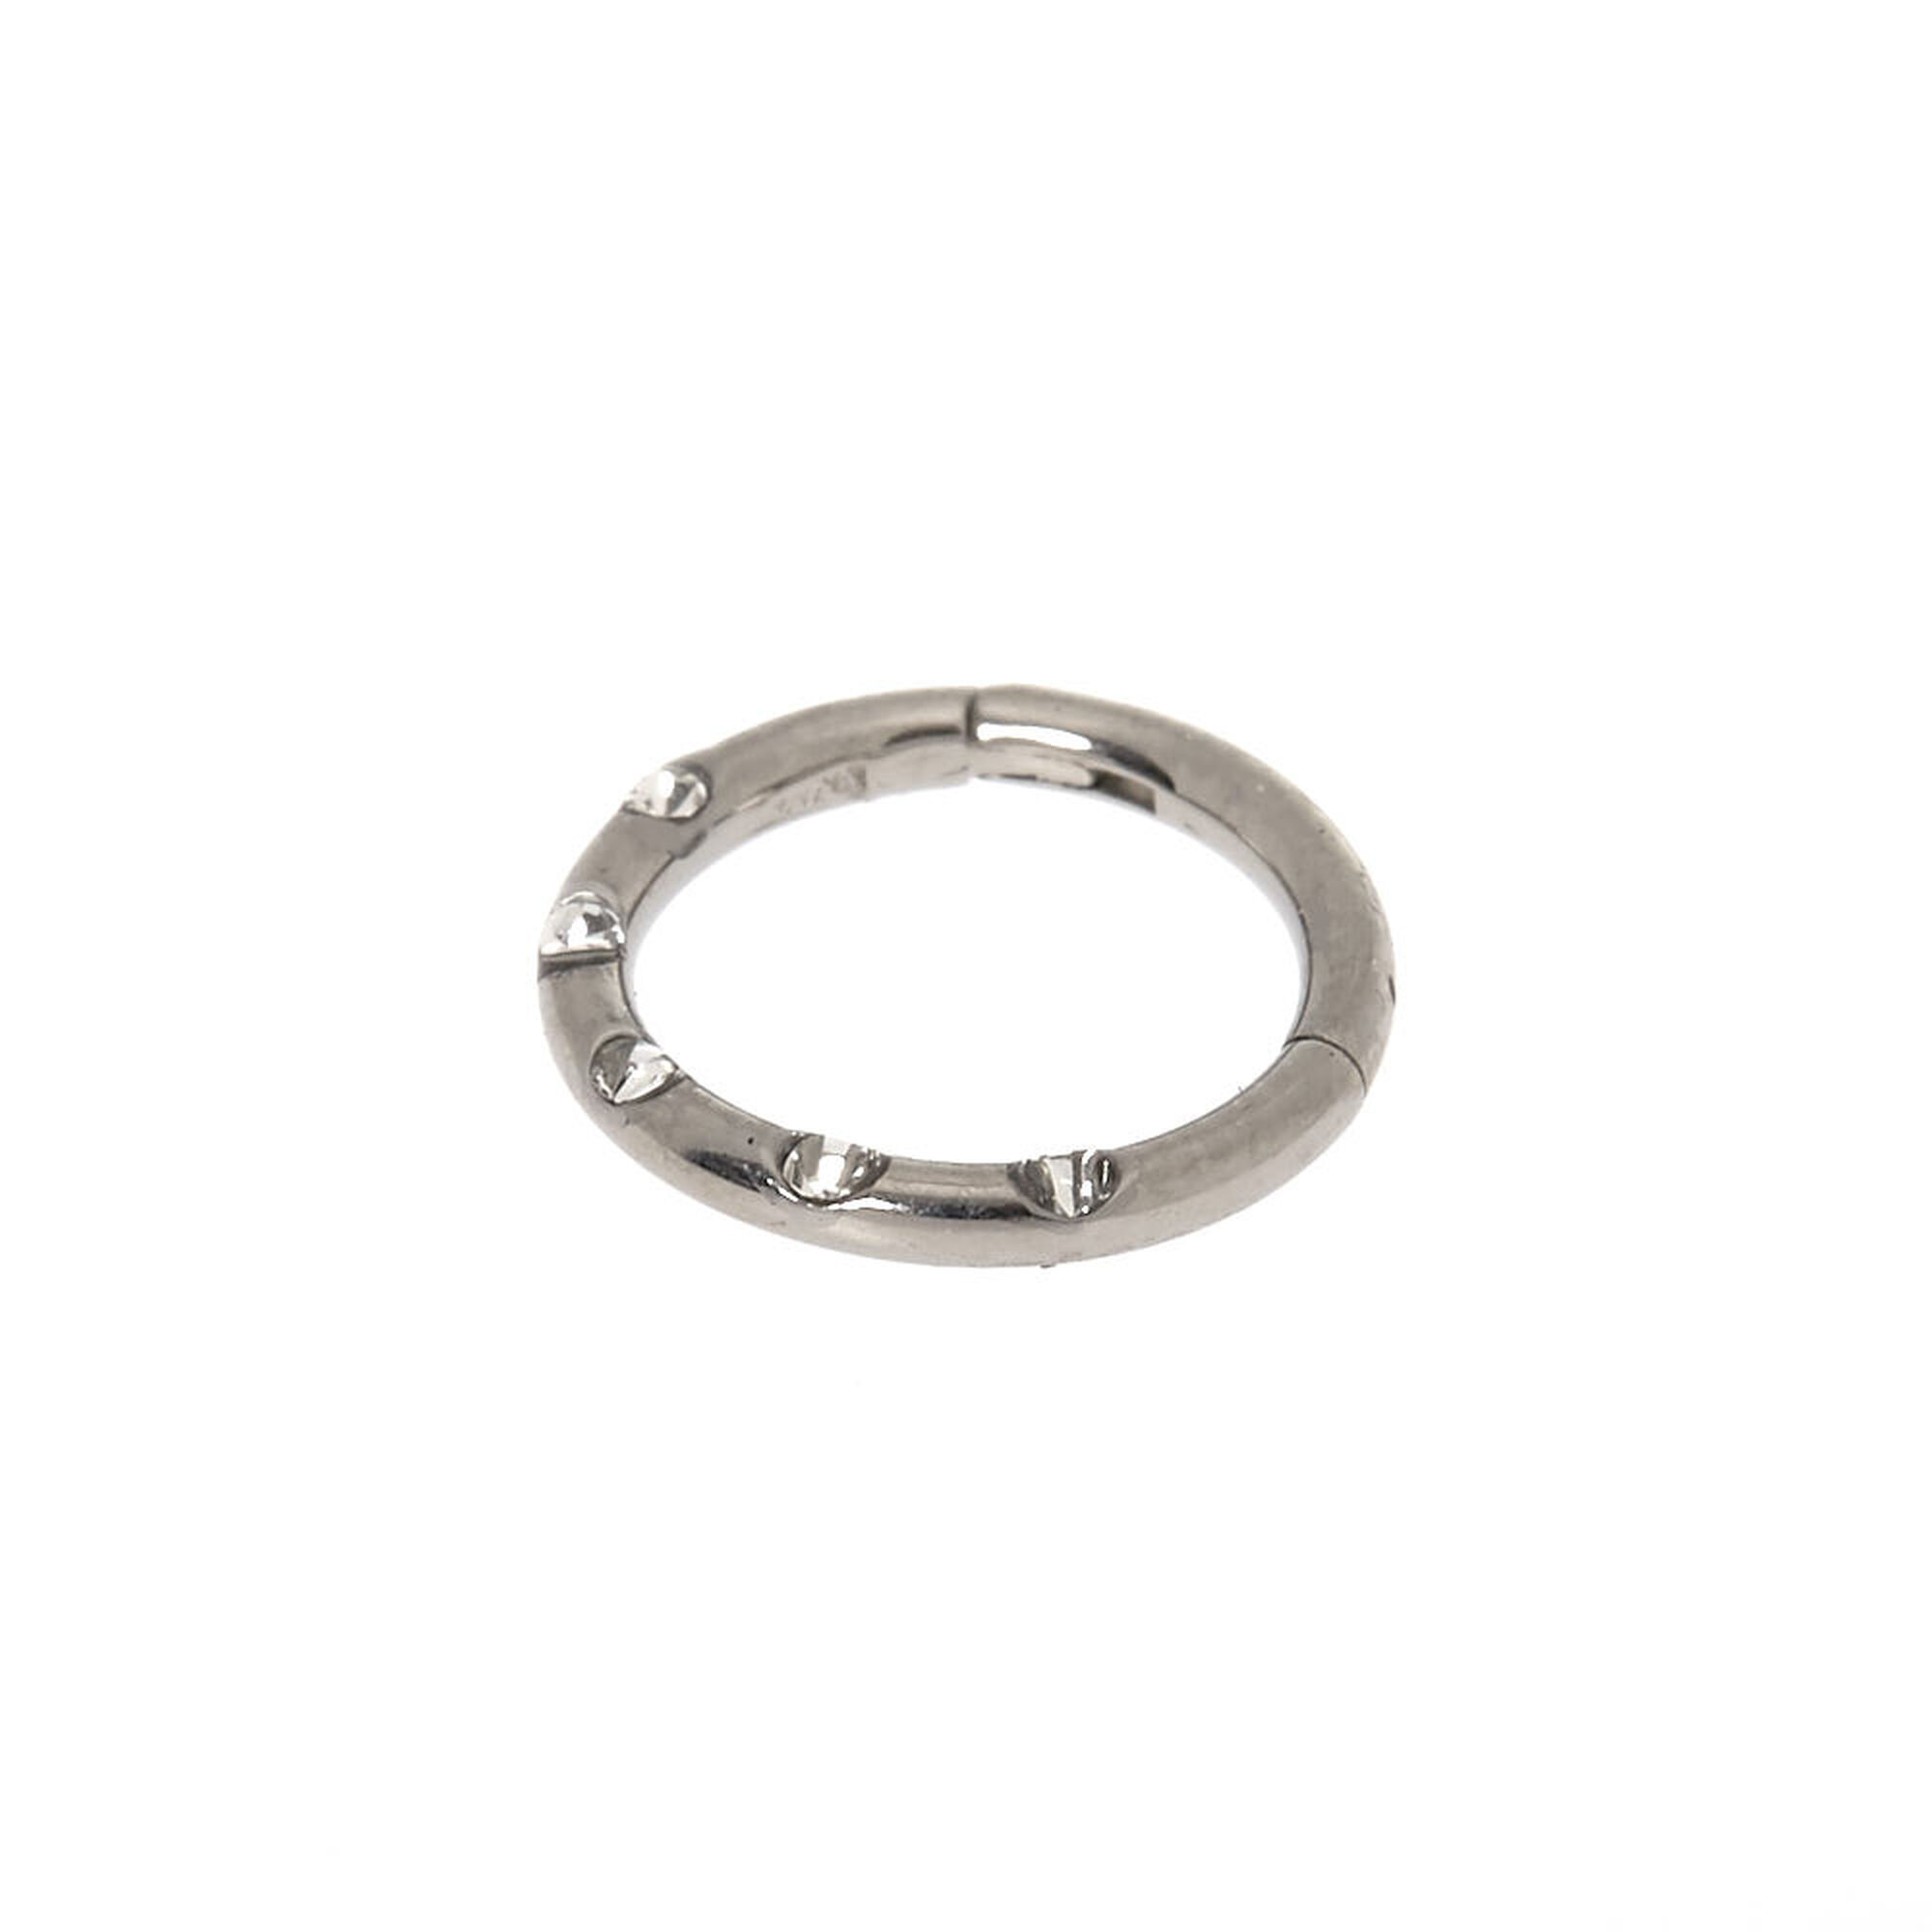 View Claires Tone Titanium Crystal Cartilage Clicker Hoop Earring Silver information